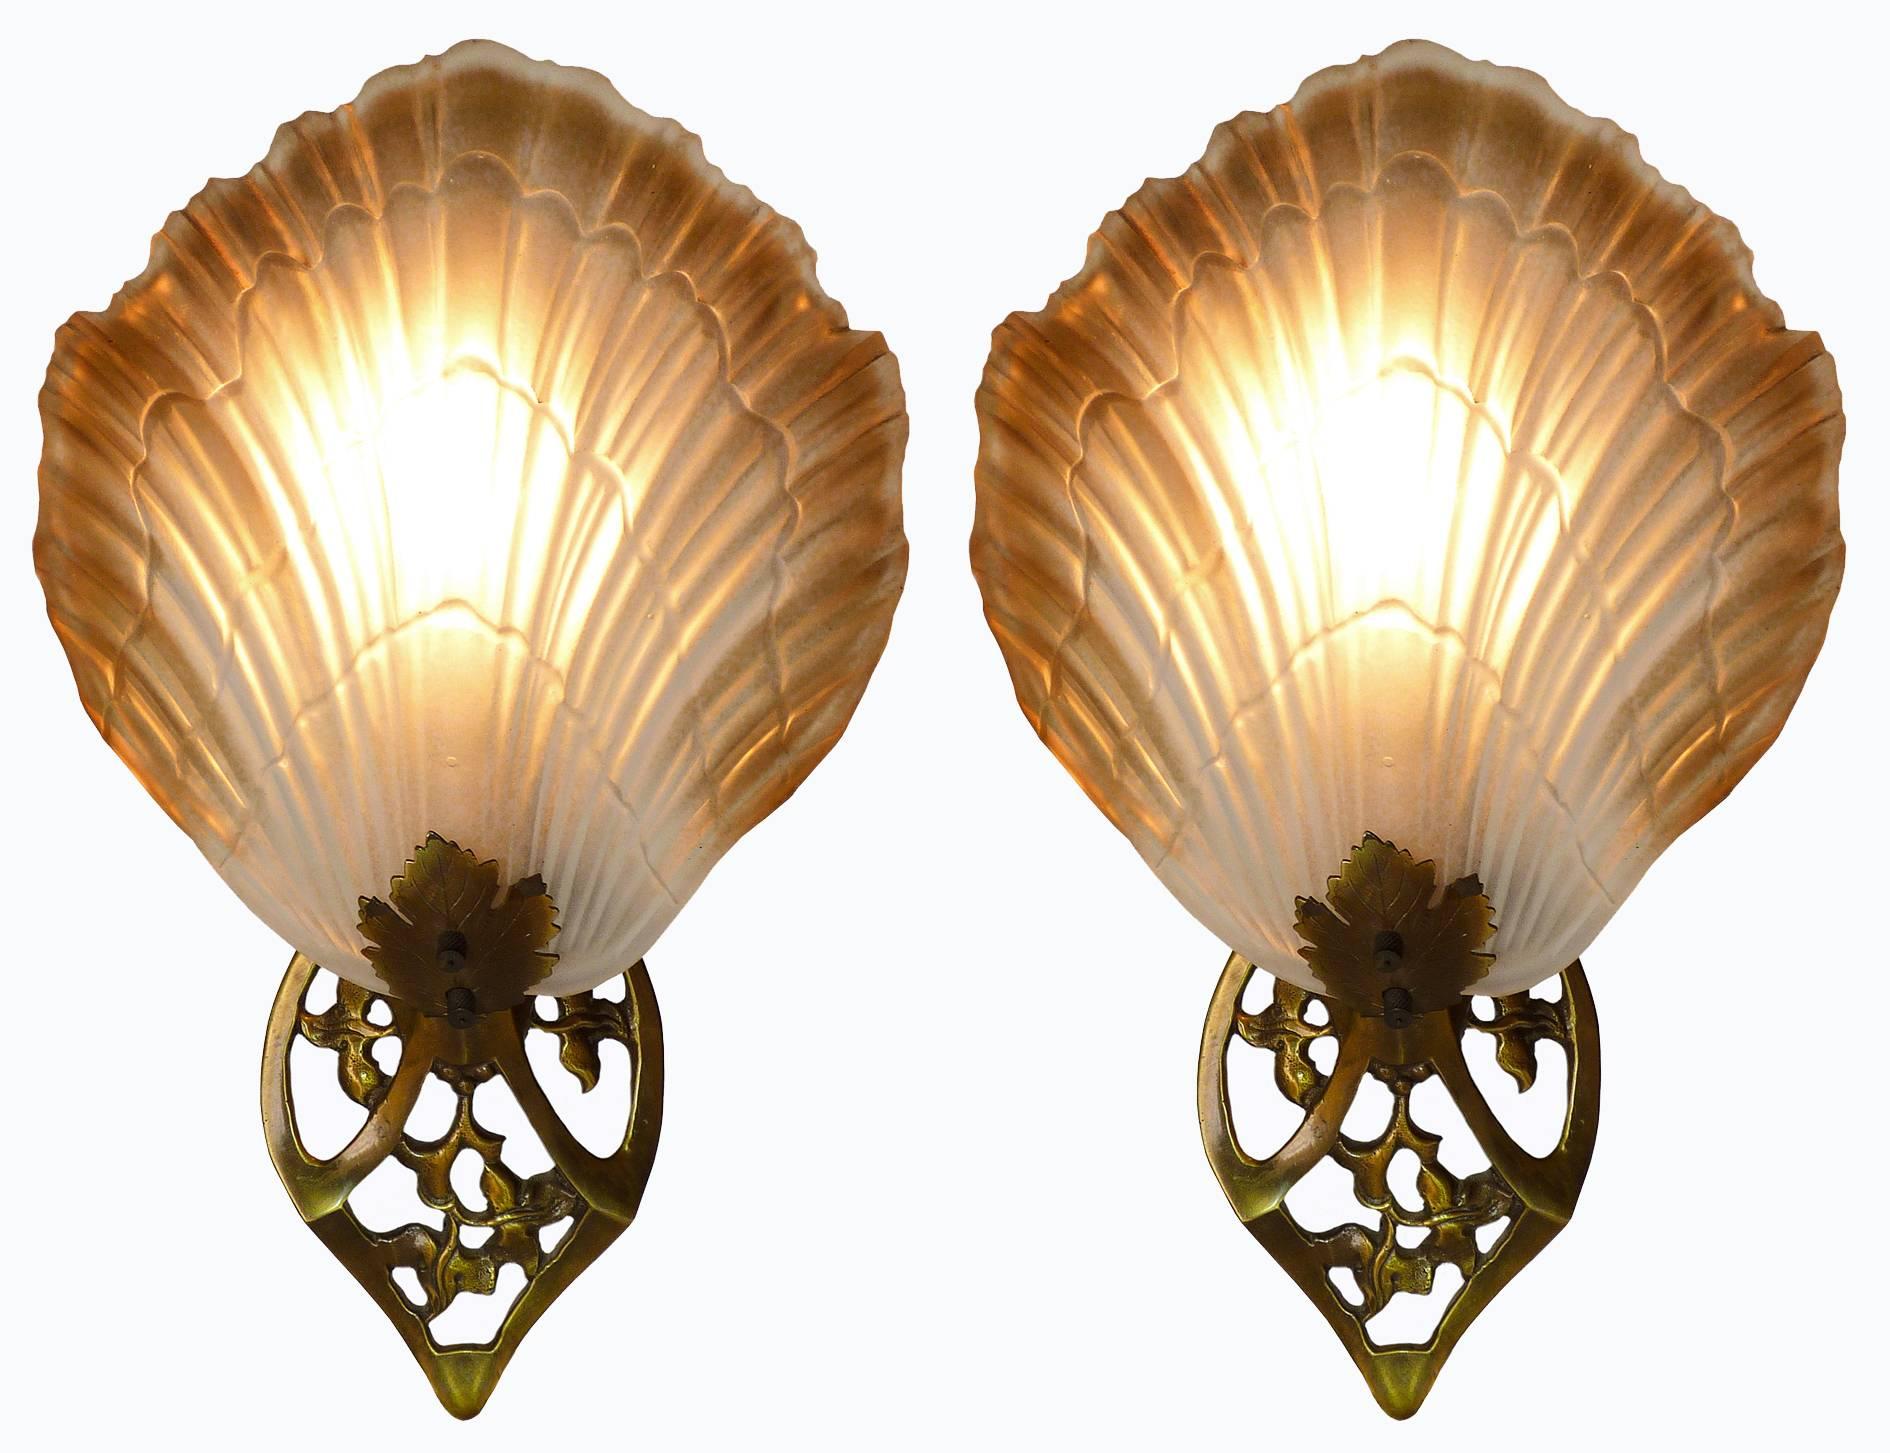 Pair of French Art Nouveau thick frosted glass lamp shades and gilt brass wall lights or sconces
Measures:
Height 36 cm
Width 20 cm
Depth 14 cm
Weight 3 Kg / 6 lb
Two-light bulbs E 14 / good working condition / European wiring.